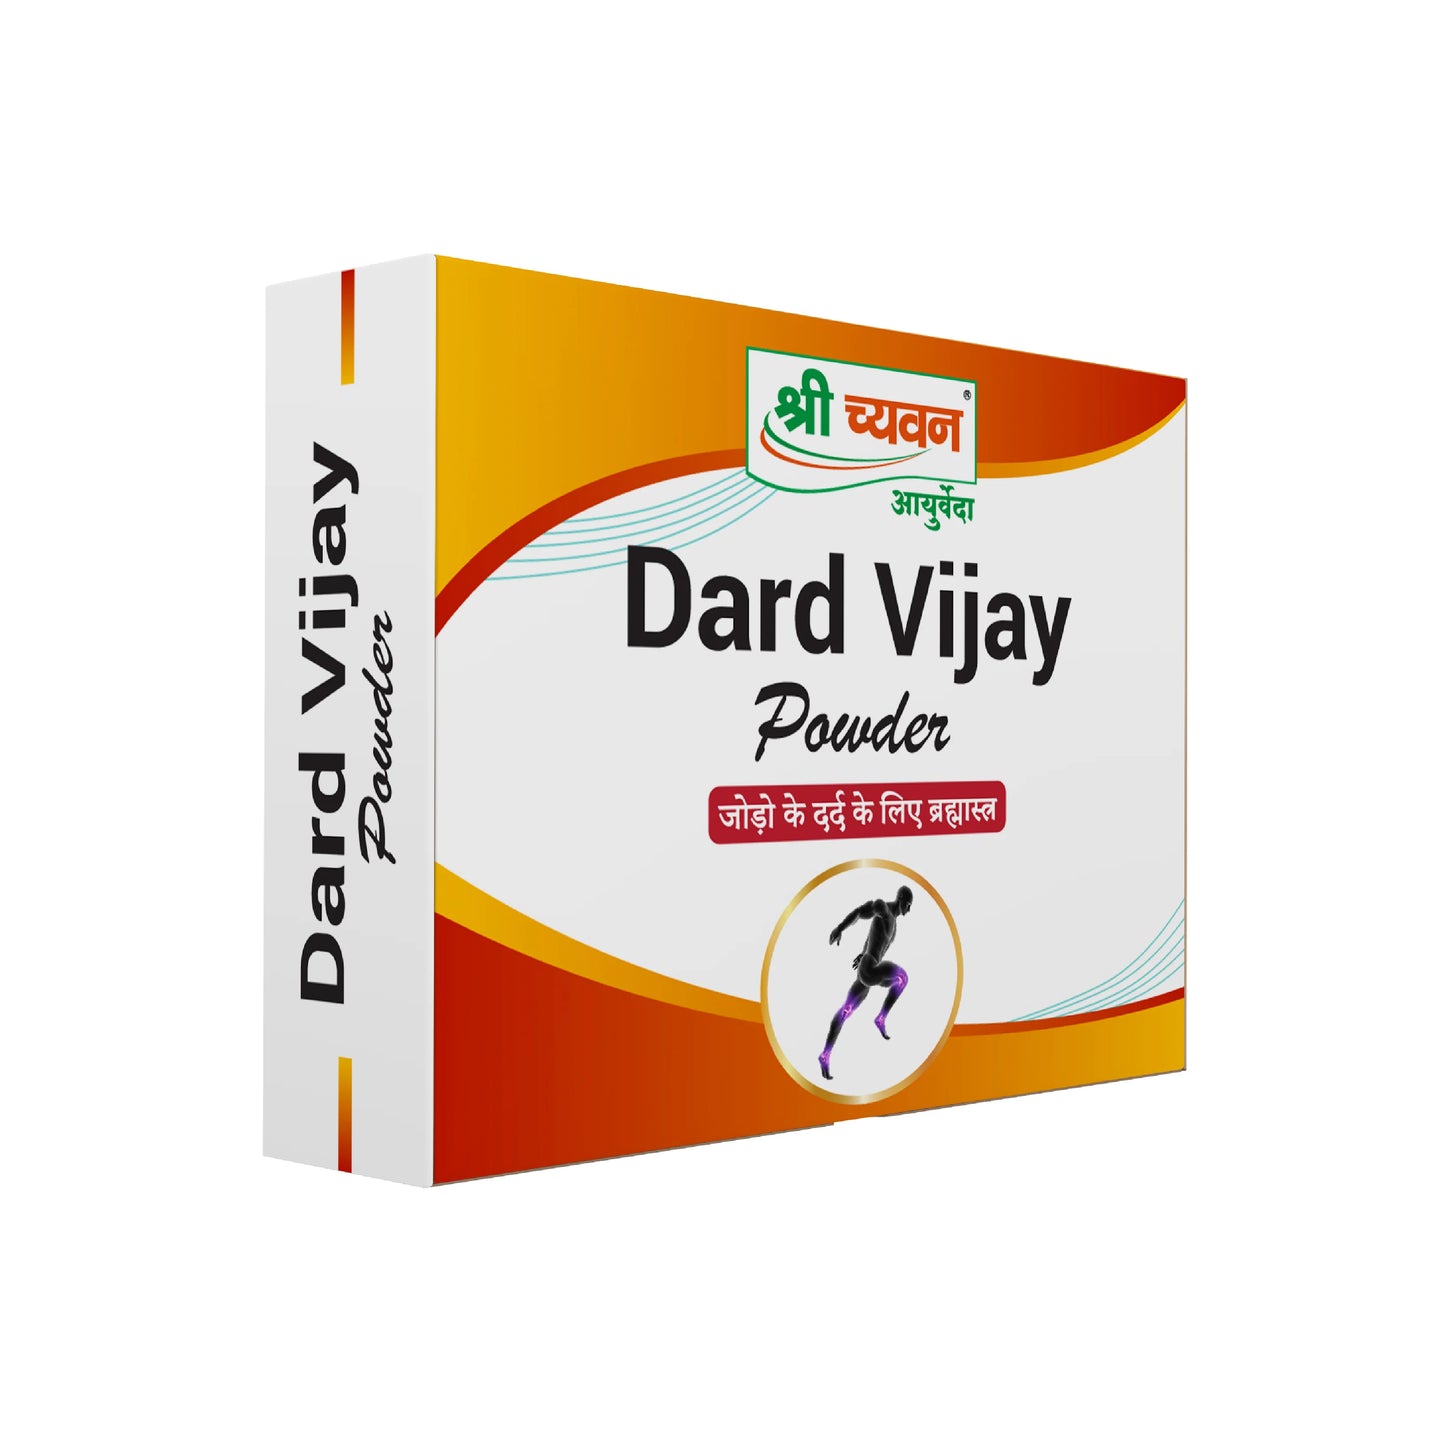 Dard vijay powder for joint and muscle